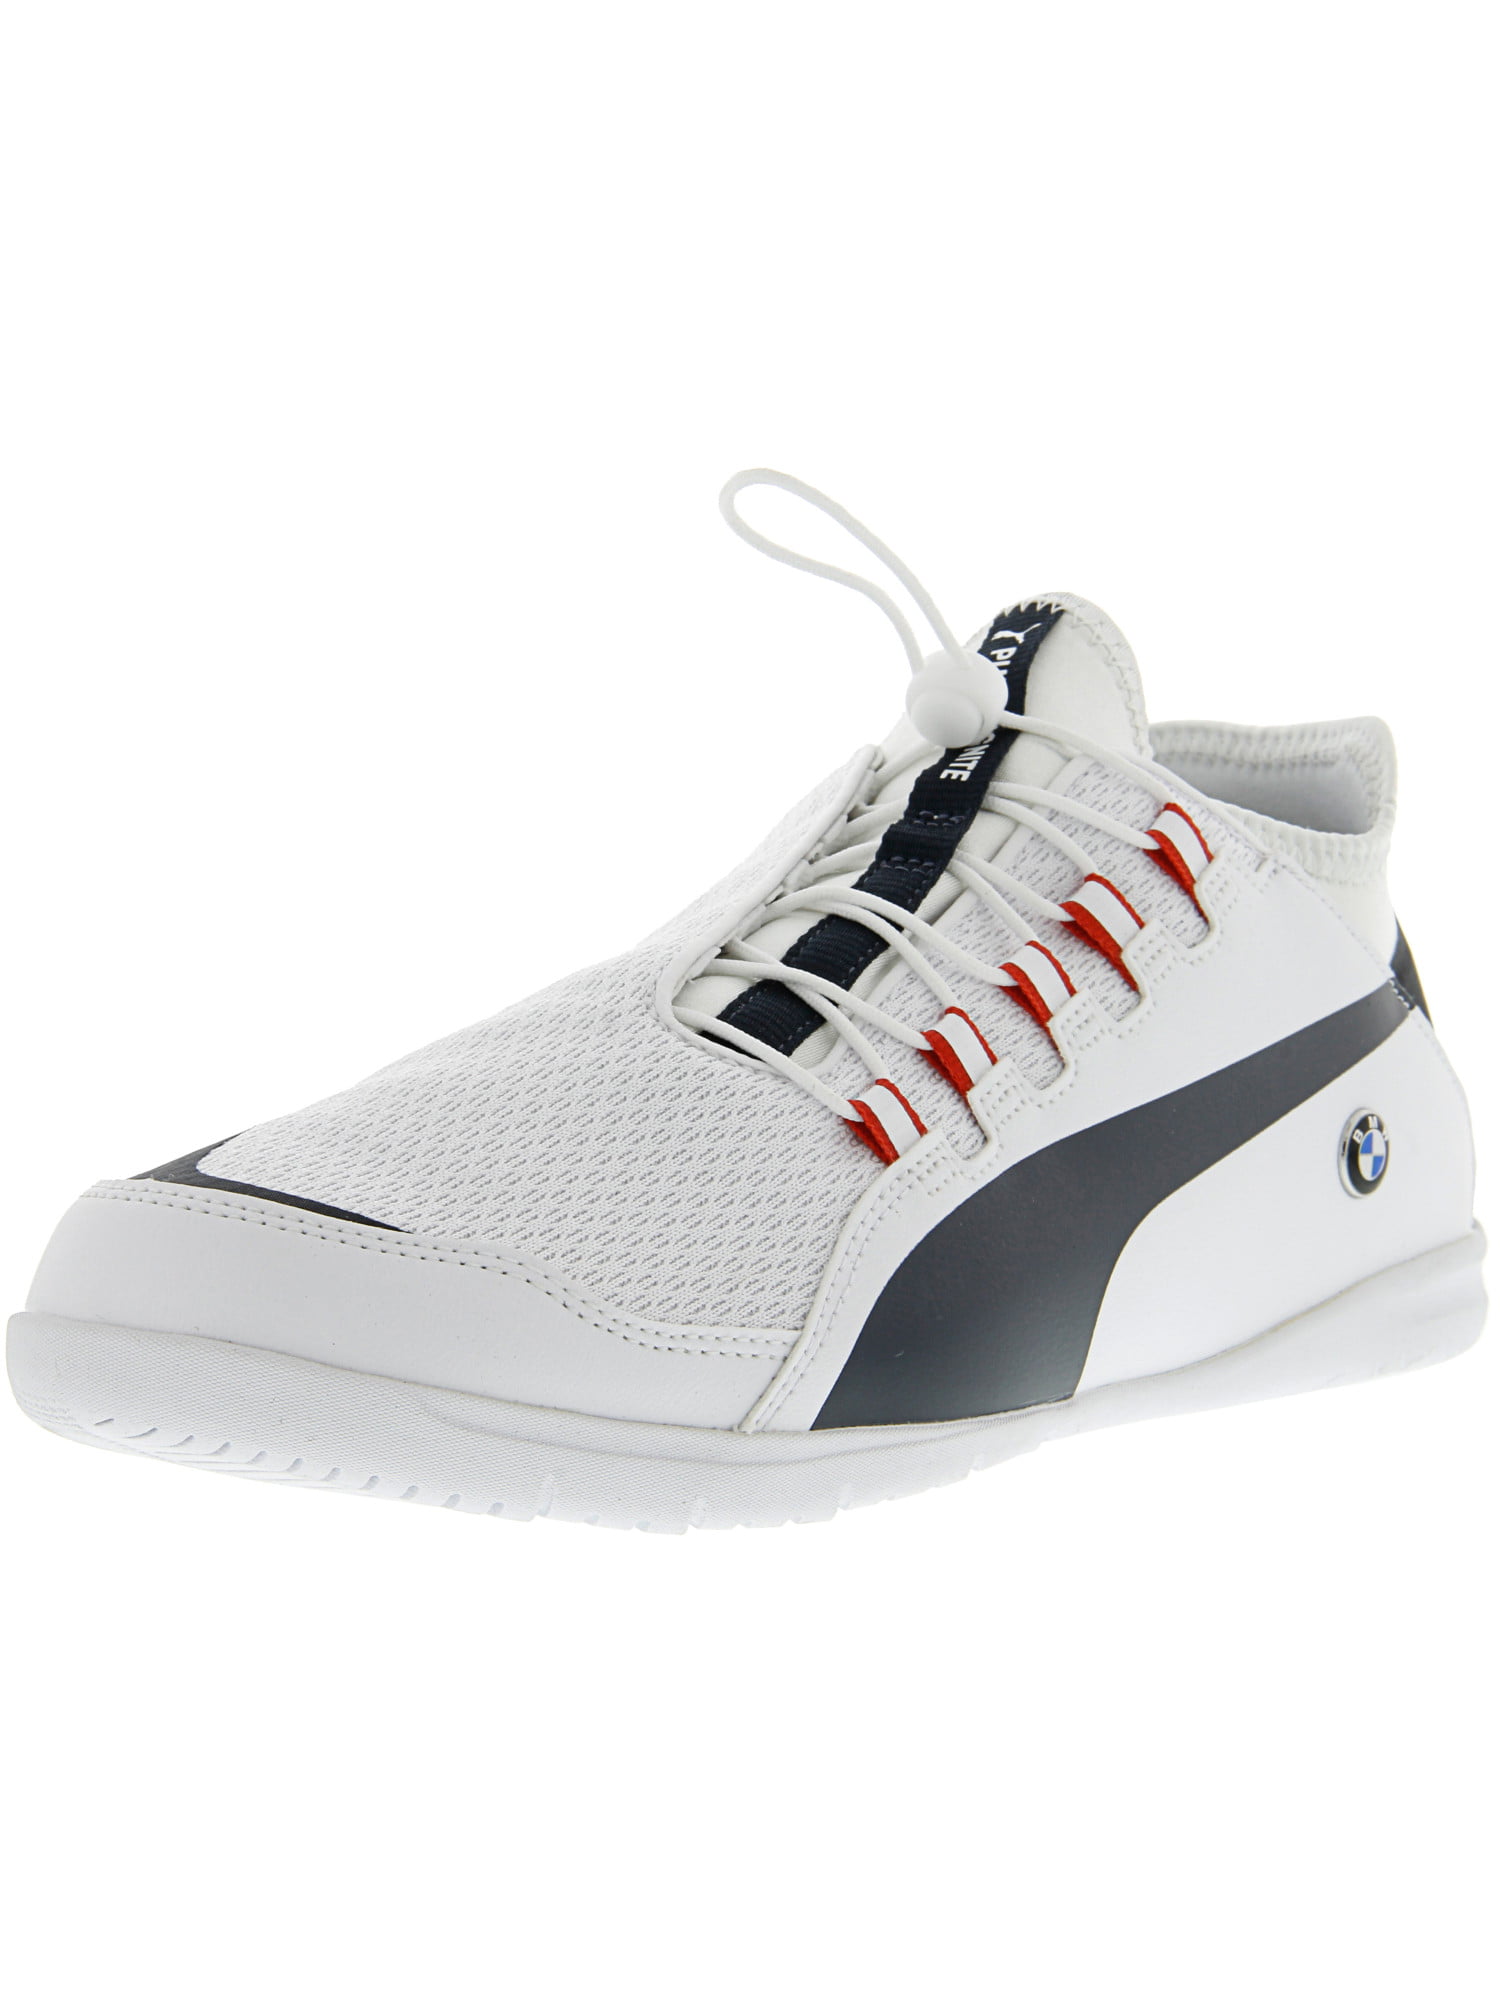 puma bmw high ankle sneakers